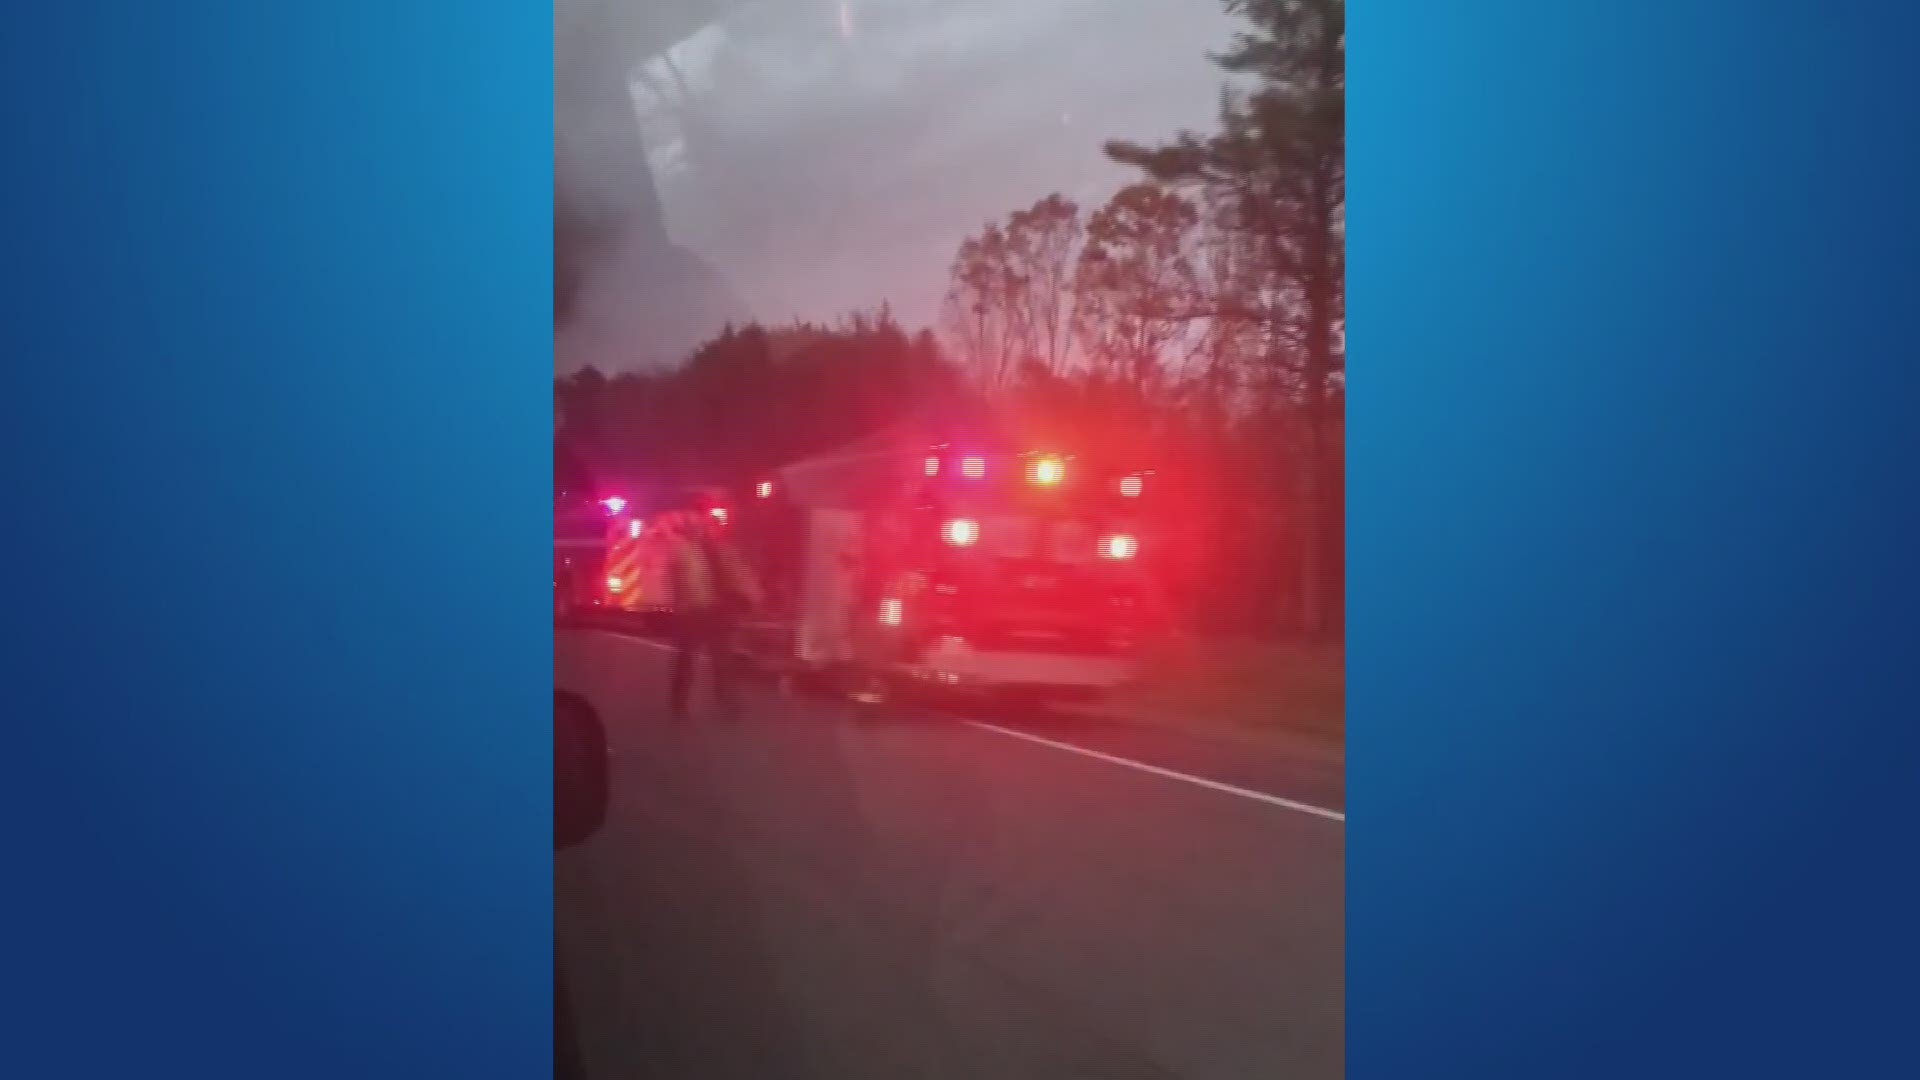 State Police say no one was injured in a car fire on I-95 near Sidney